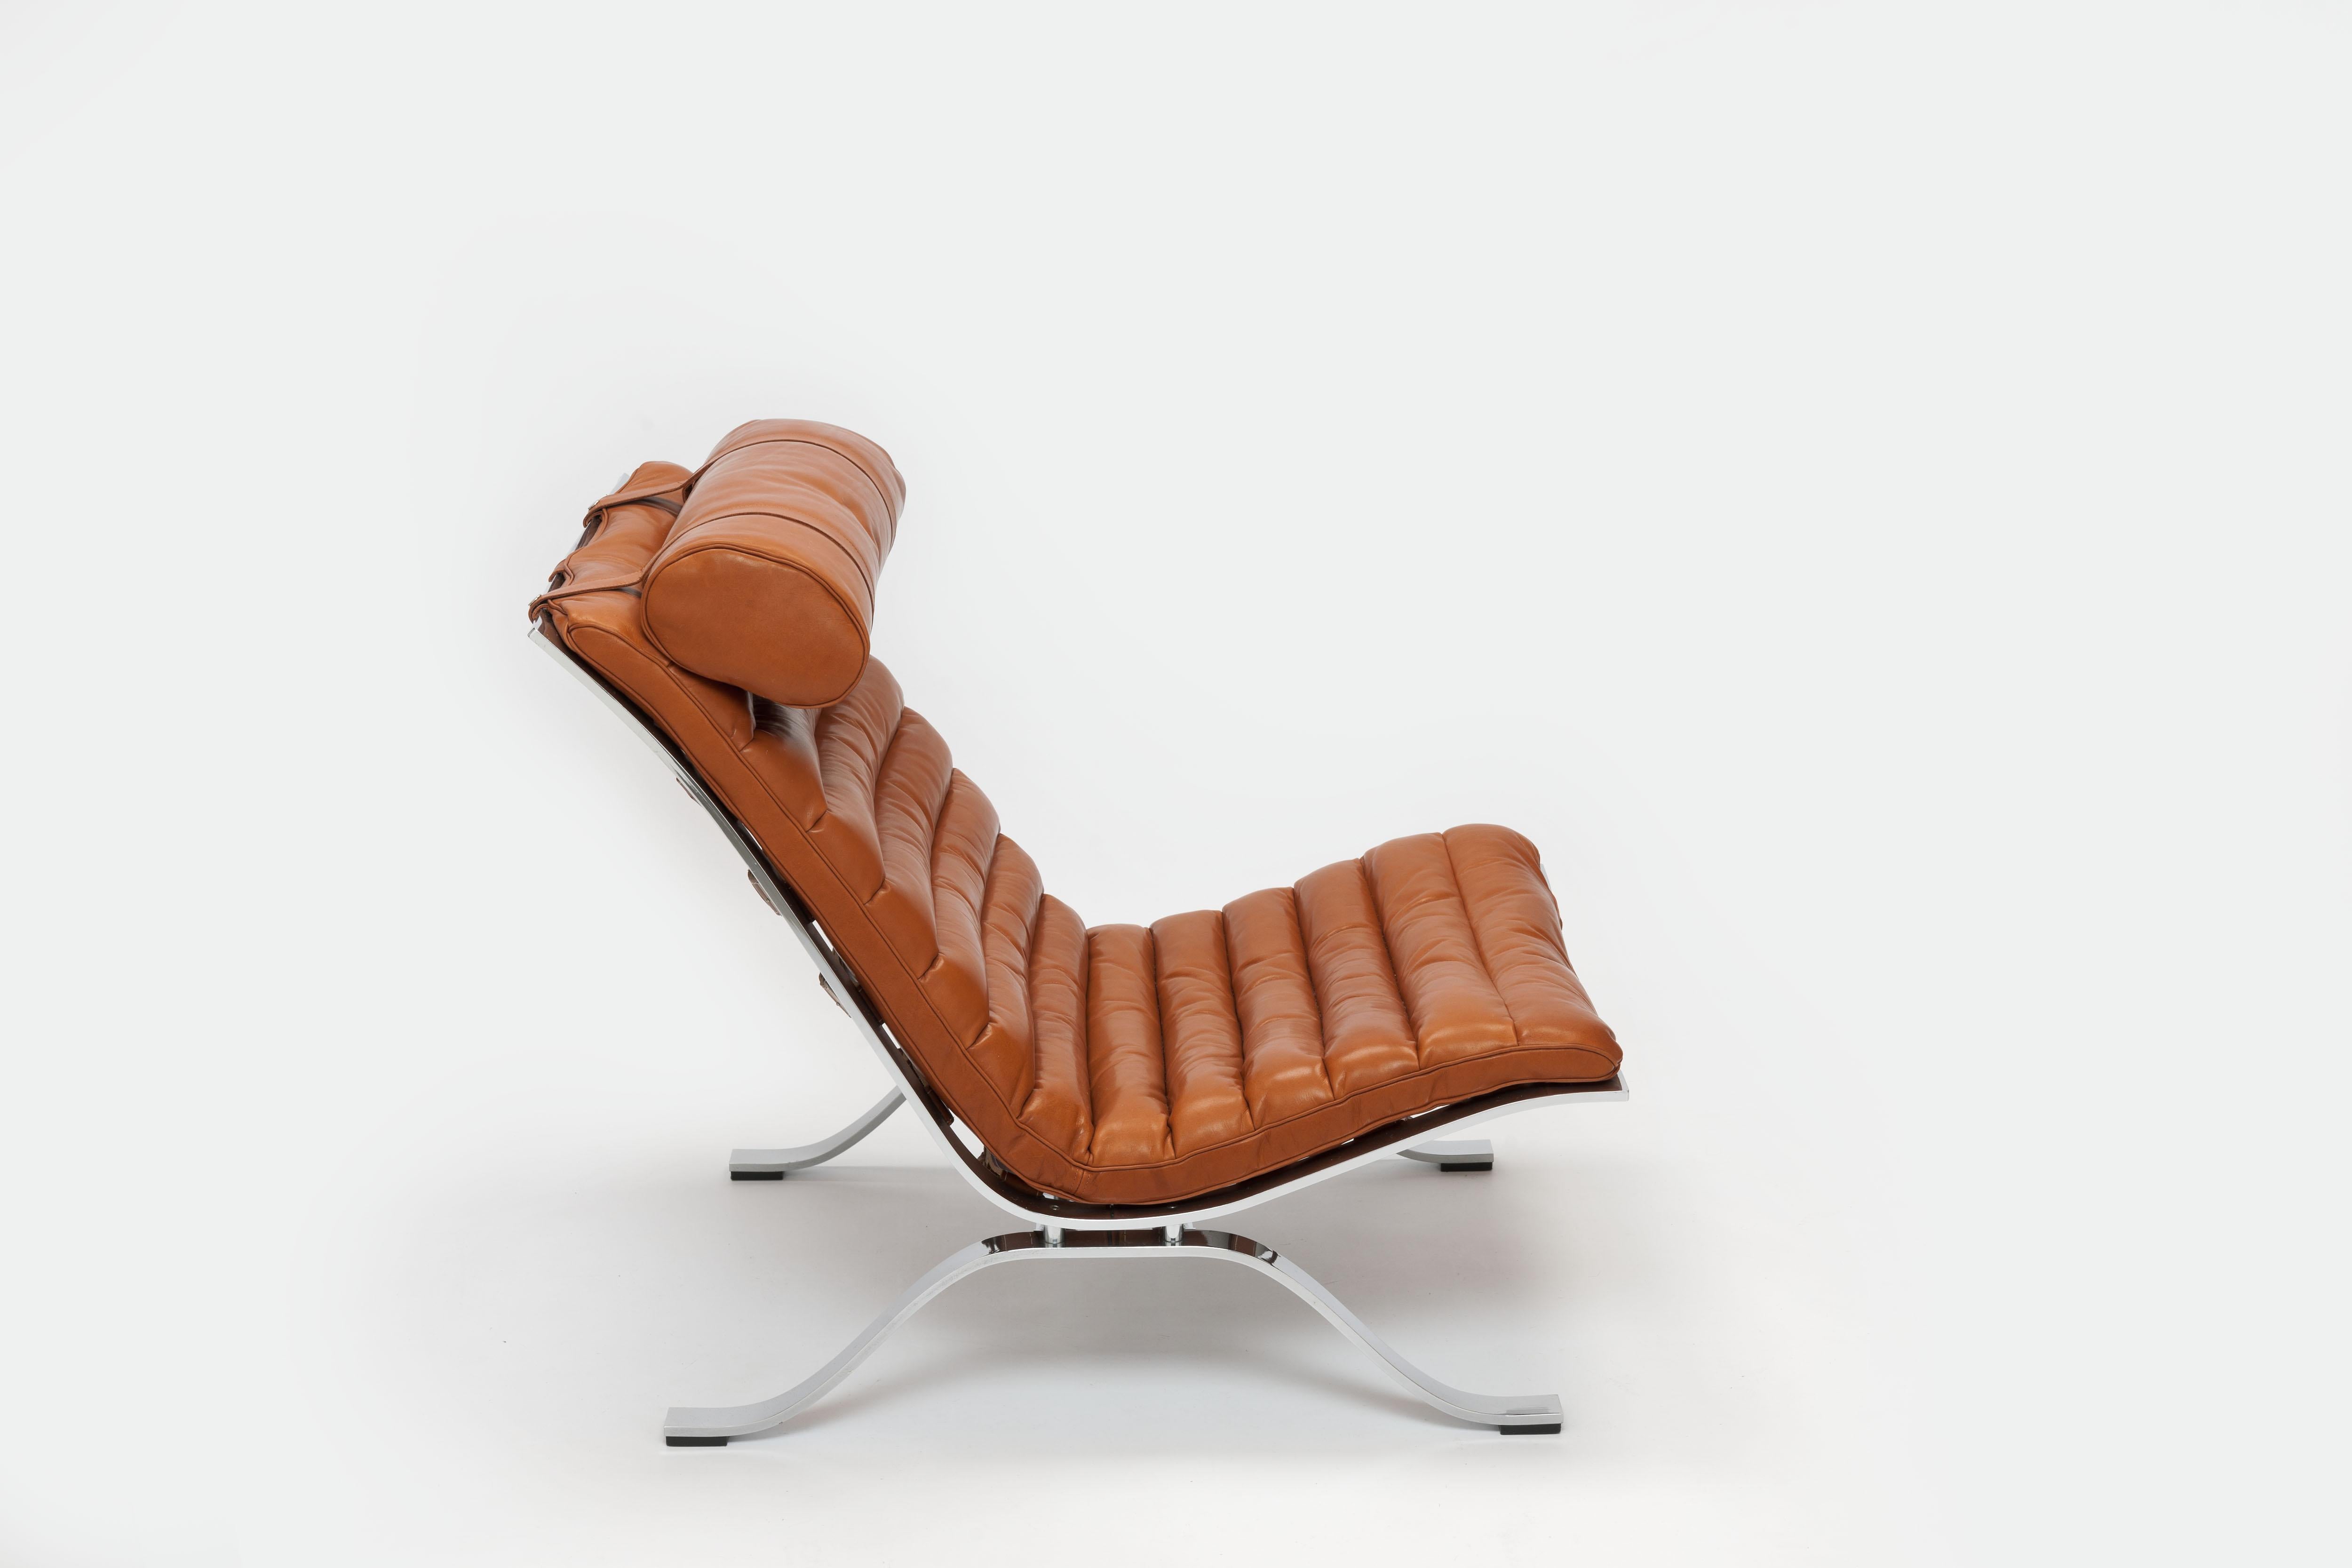 Low slung steel framed leather 'Ari' Lounge chair by Swedish designer Arne Norell from 1966. 
This vintage lounge chair comes with new upholstery (priced accordingly), executed in a cognac color leather, which is made by the original manufacturer